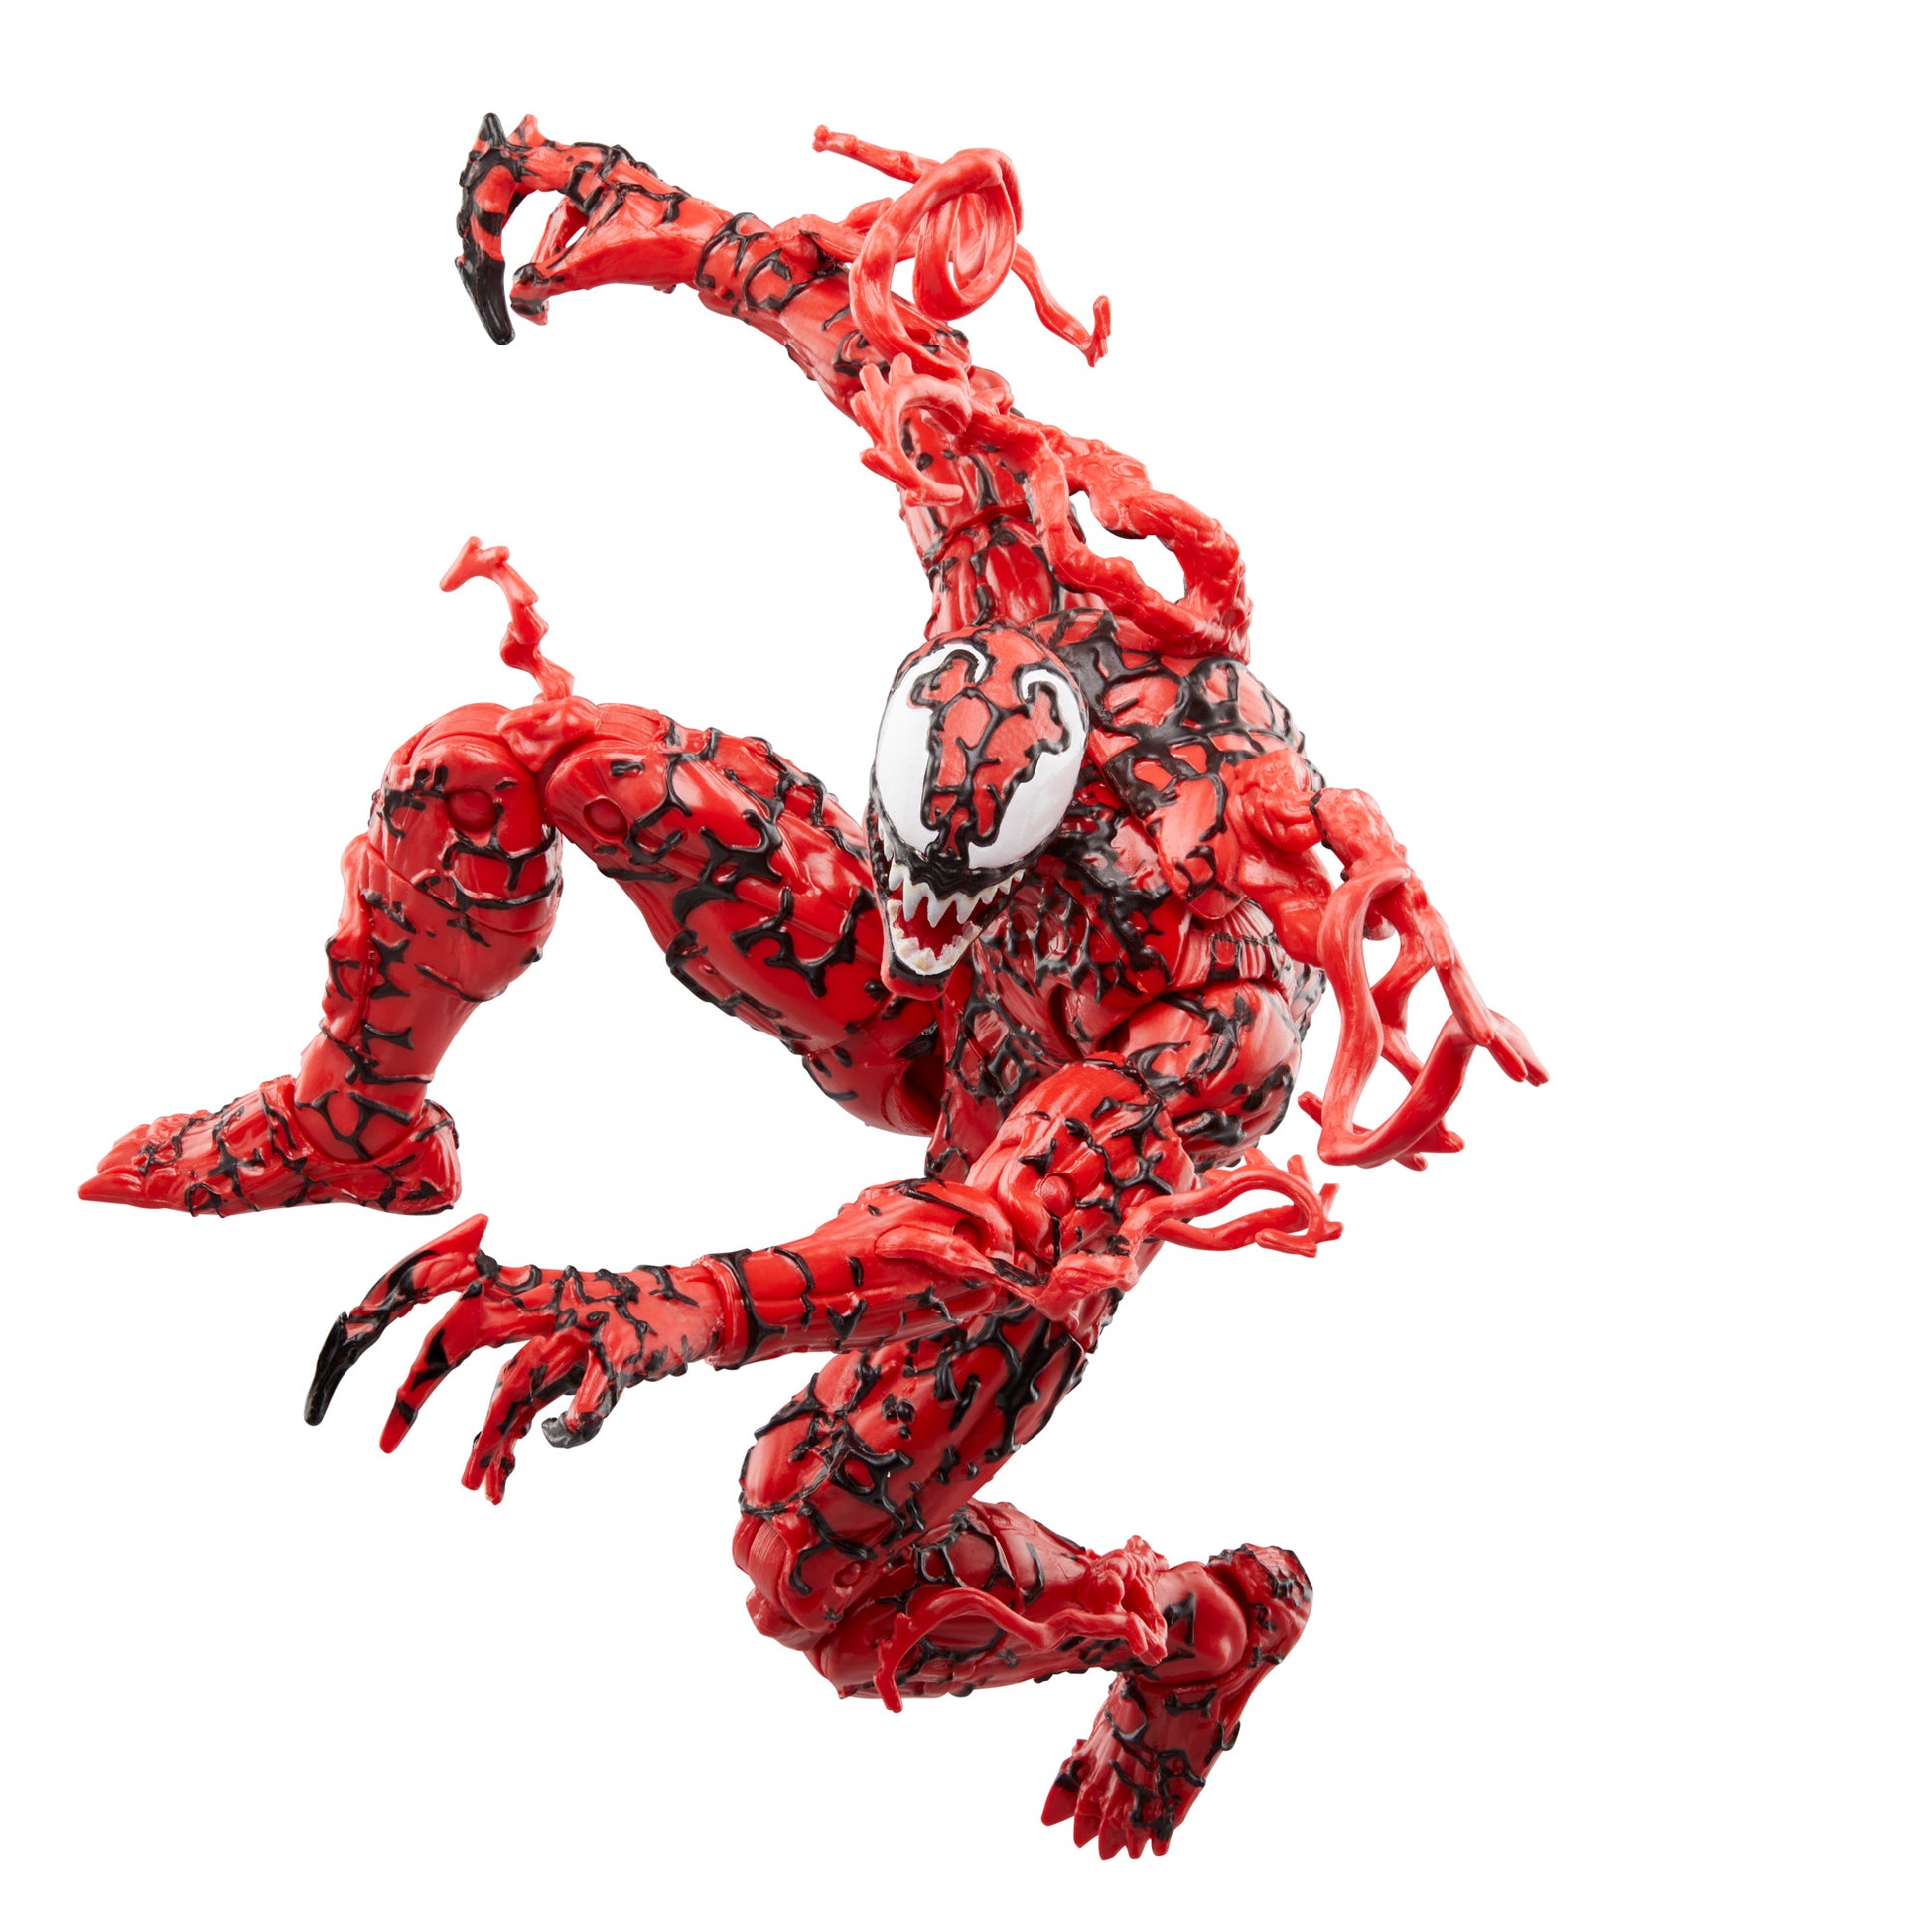 Marvel Legends Series Carnage, Marvel Comics Collectible Action Figure